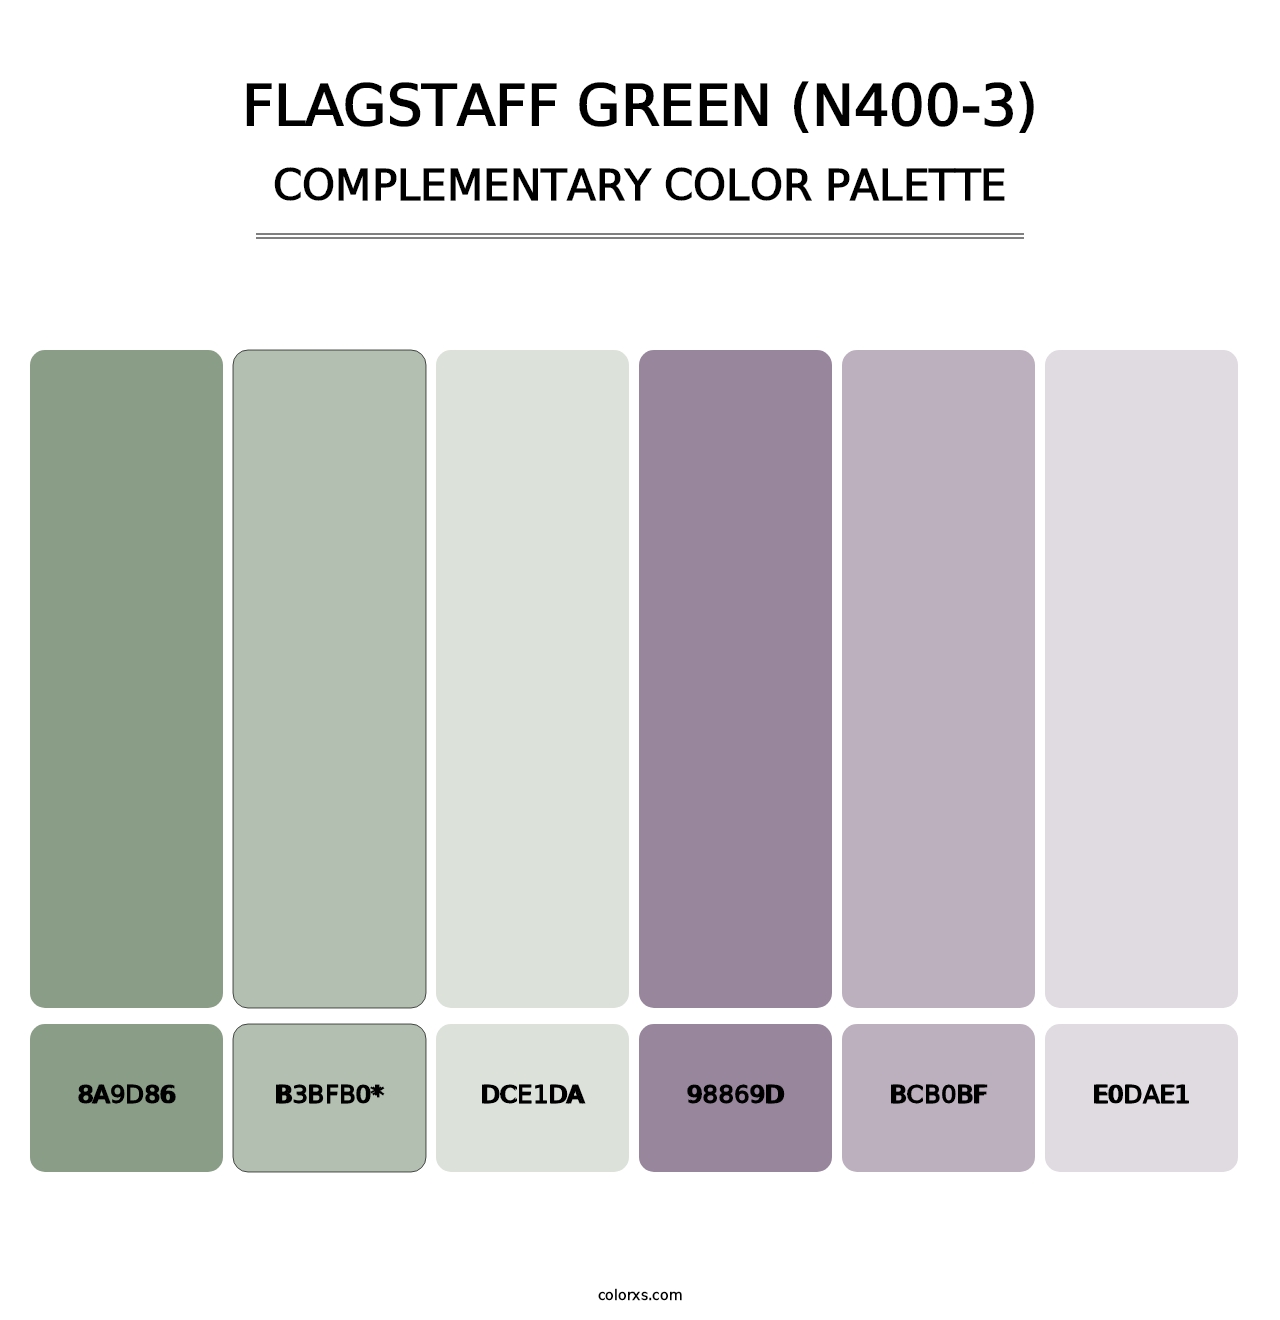 Flagstaff Green (N400-3) - Complementary Color Palette